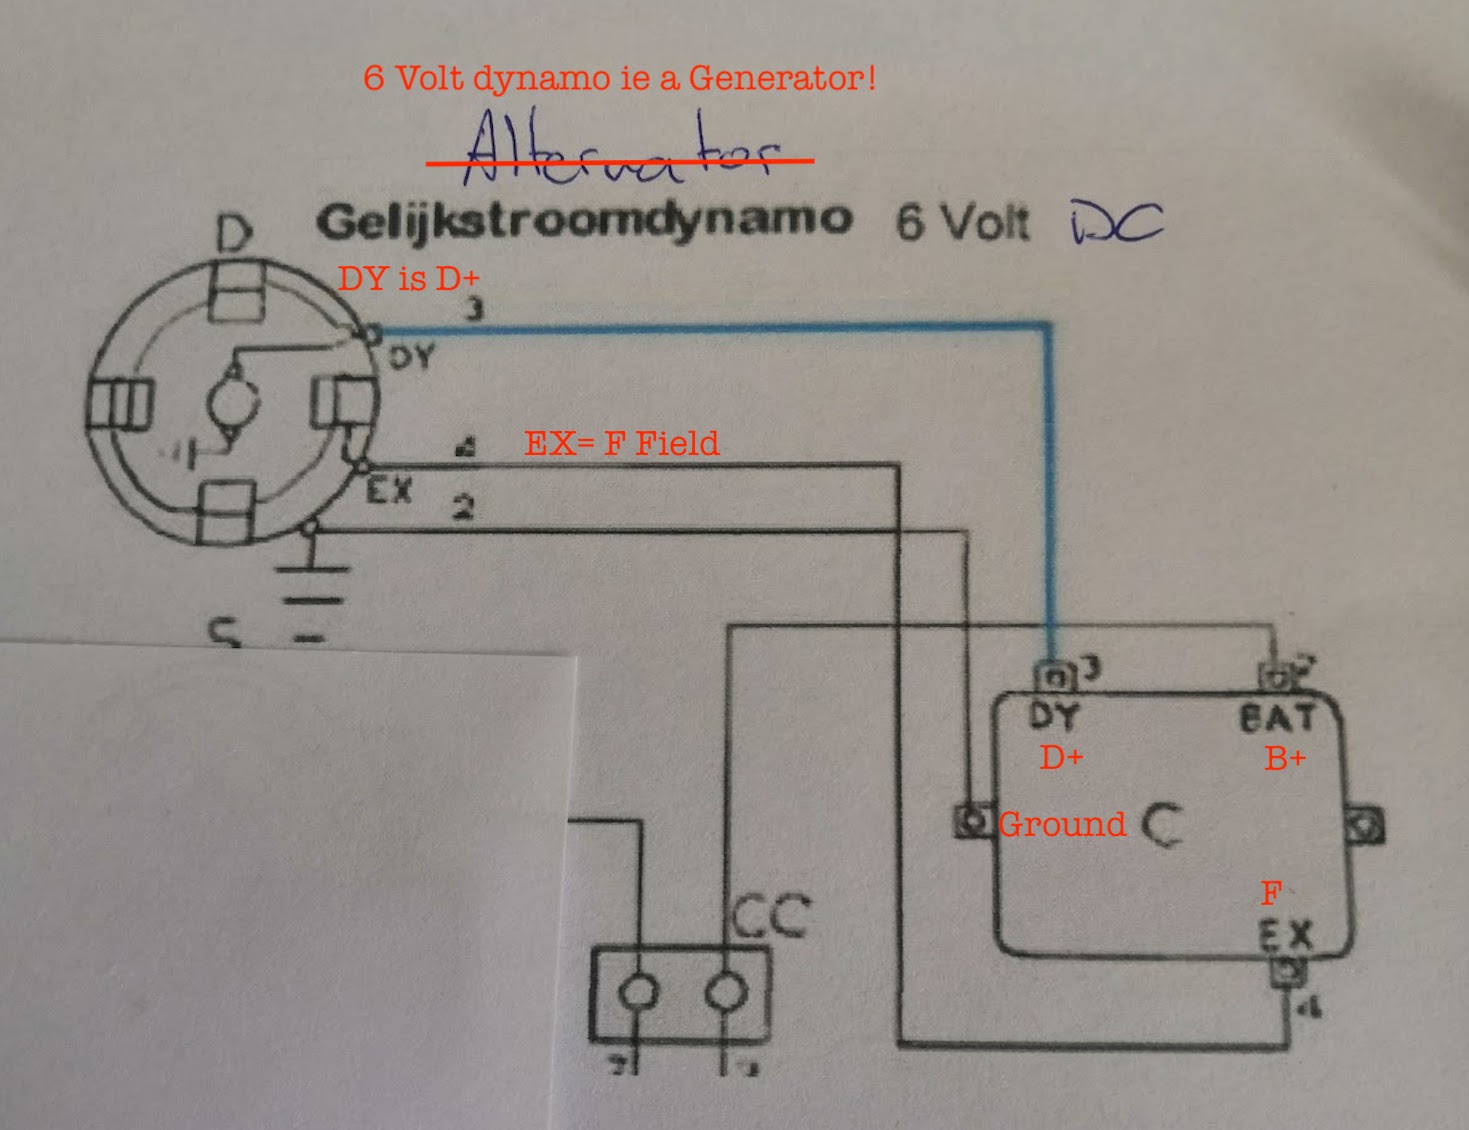 Penelope toekomst abstract Automotive 6 Volt Generator Transistor Voltage Regulator | Page 22 |  Electronics Forum (Circuits, Projects and Microcontrollers)